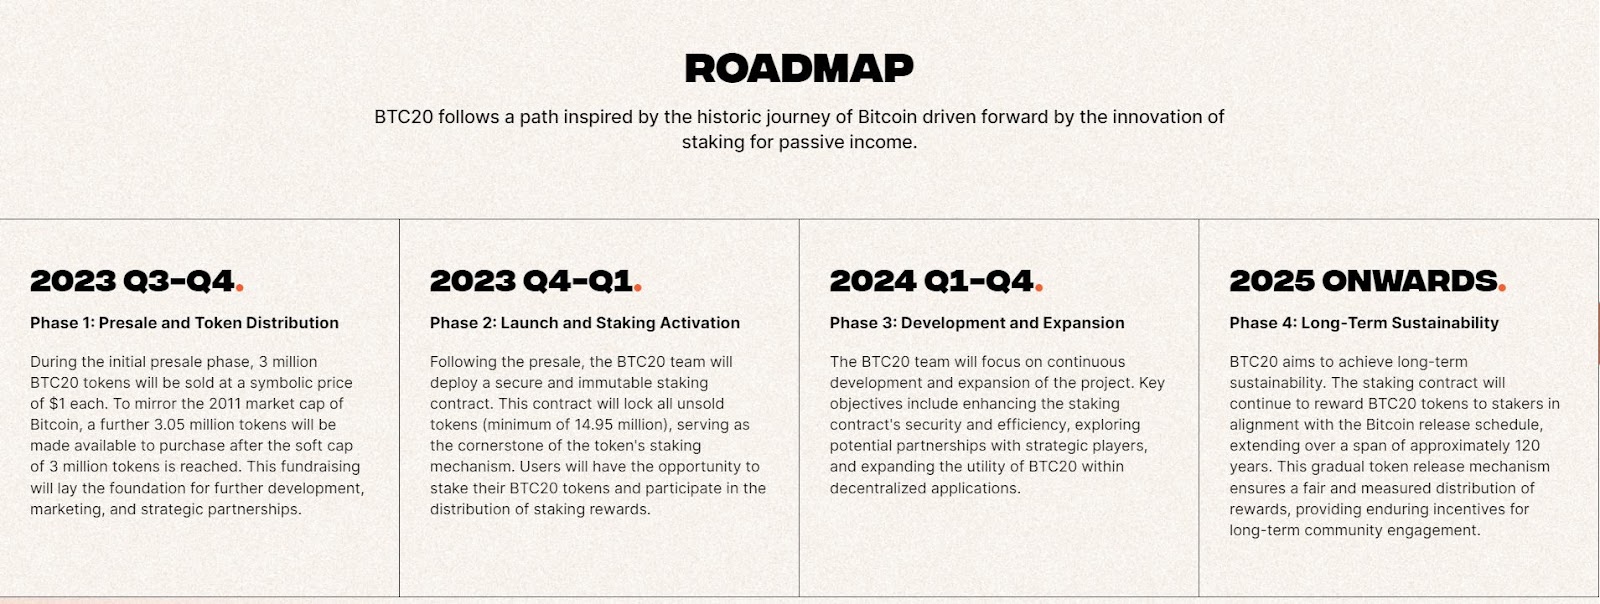 A roadmap from the official BTC20 website detailing their planned trajectory in four distinct phases.